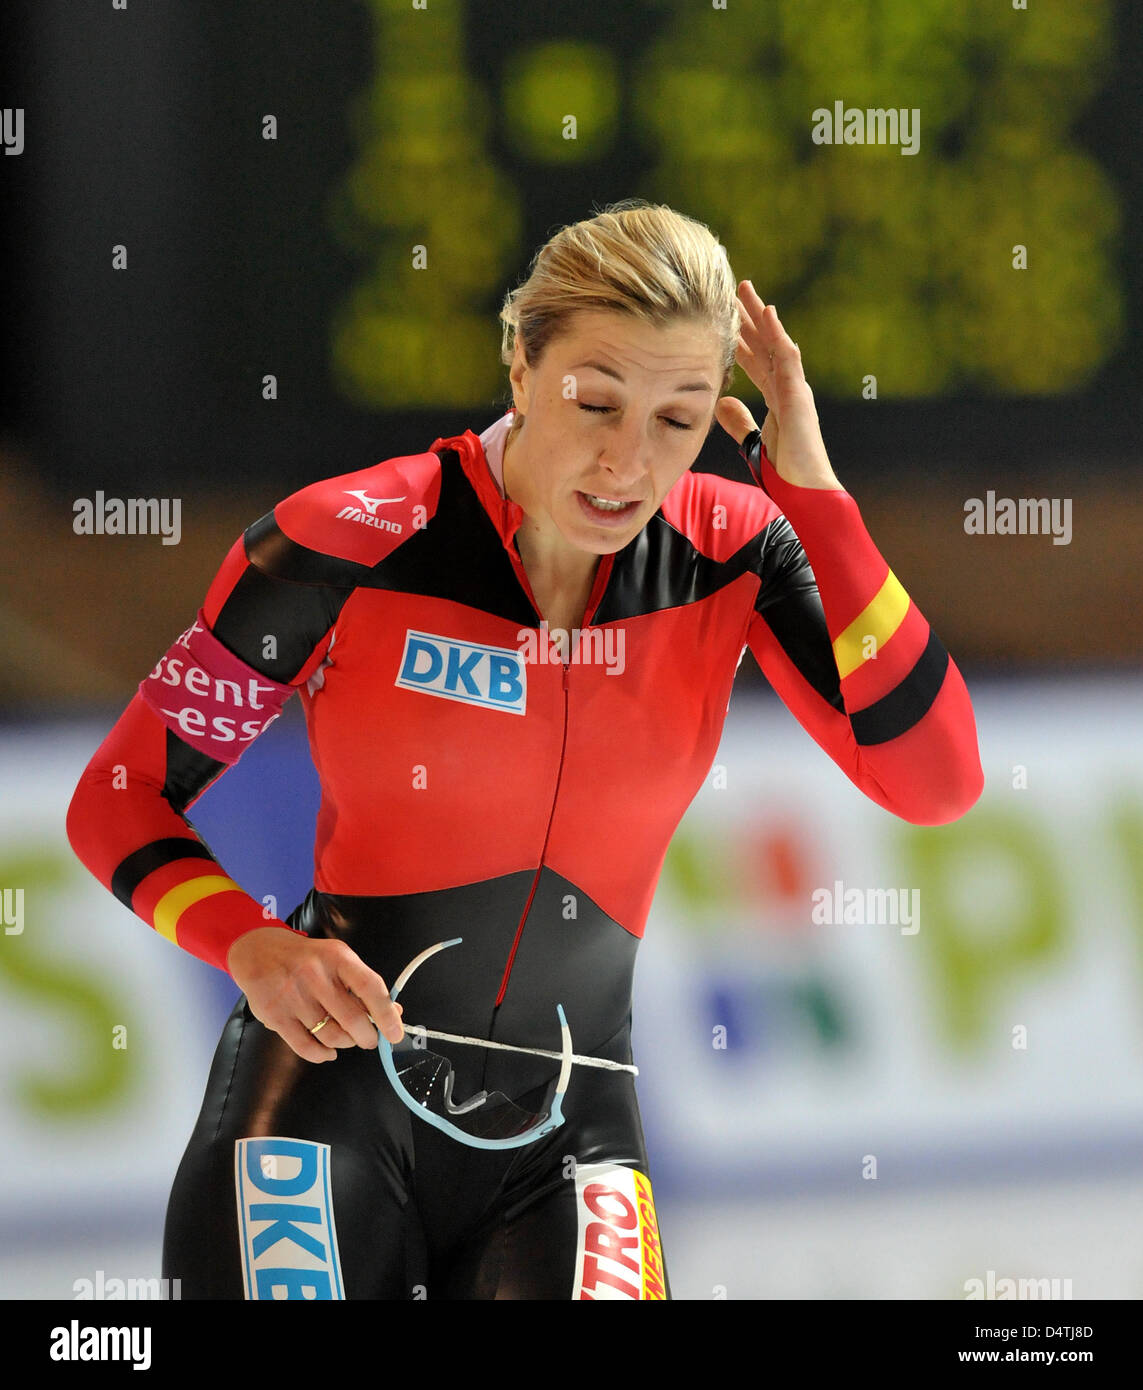 German speed skater Anni Friesinger-Postma shown after the women?s 1500m race at the Speed Skating World Cup in Berlin, Germany, 08 November 2009. Photo: HENDRIK SCHMIDT Stock Photo